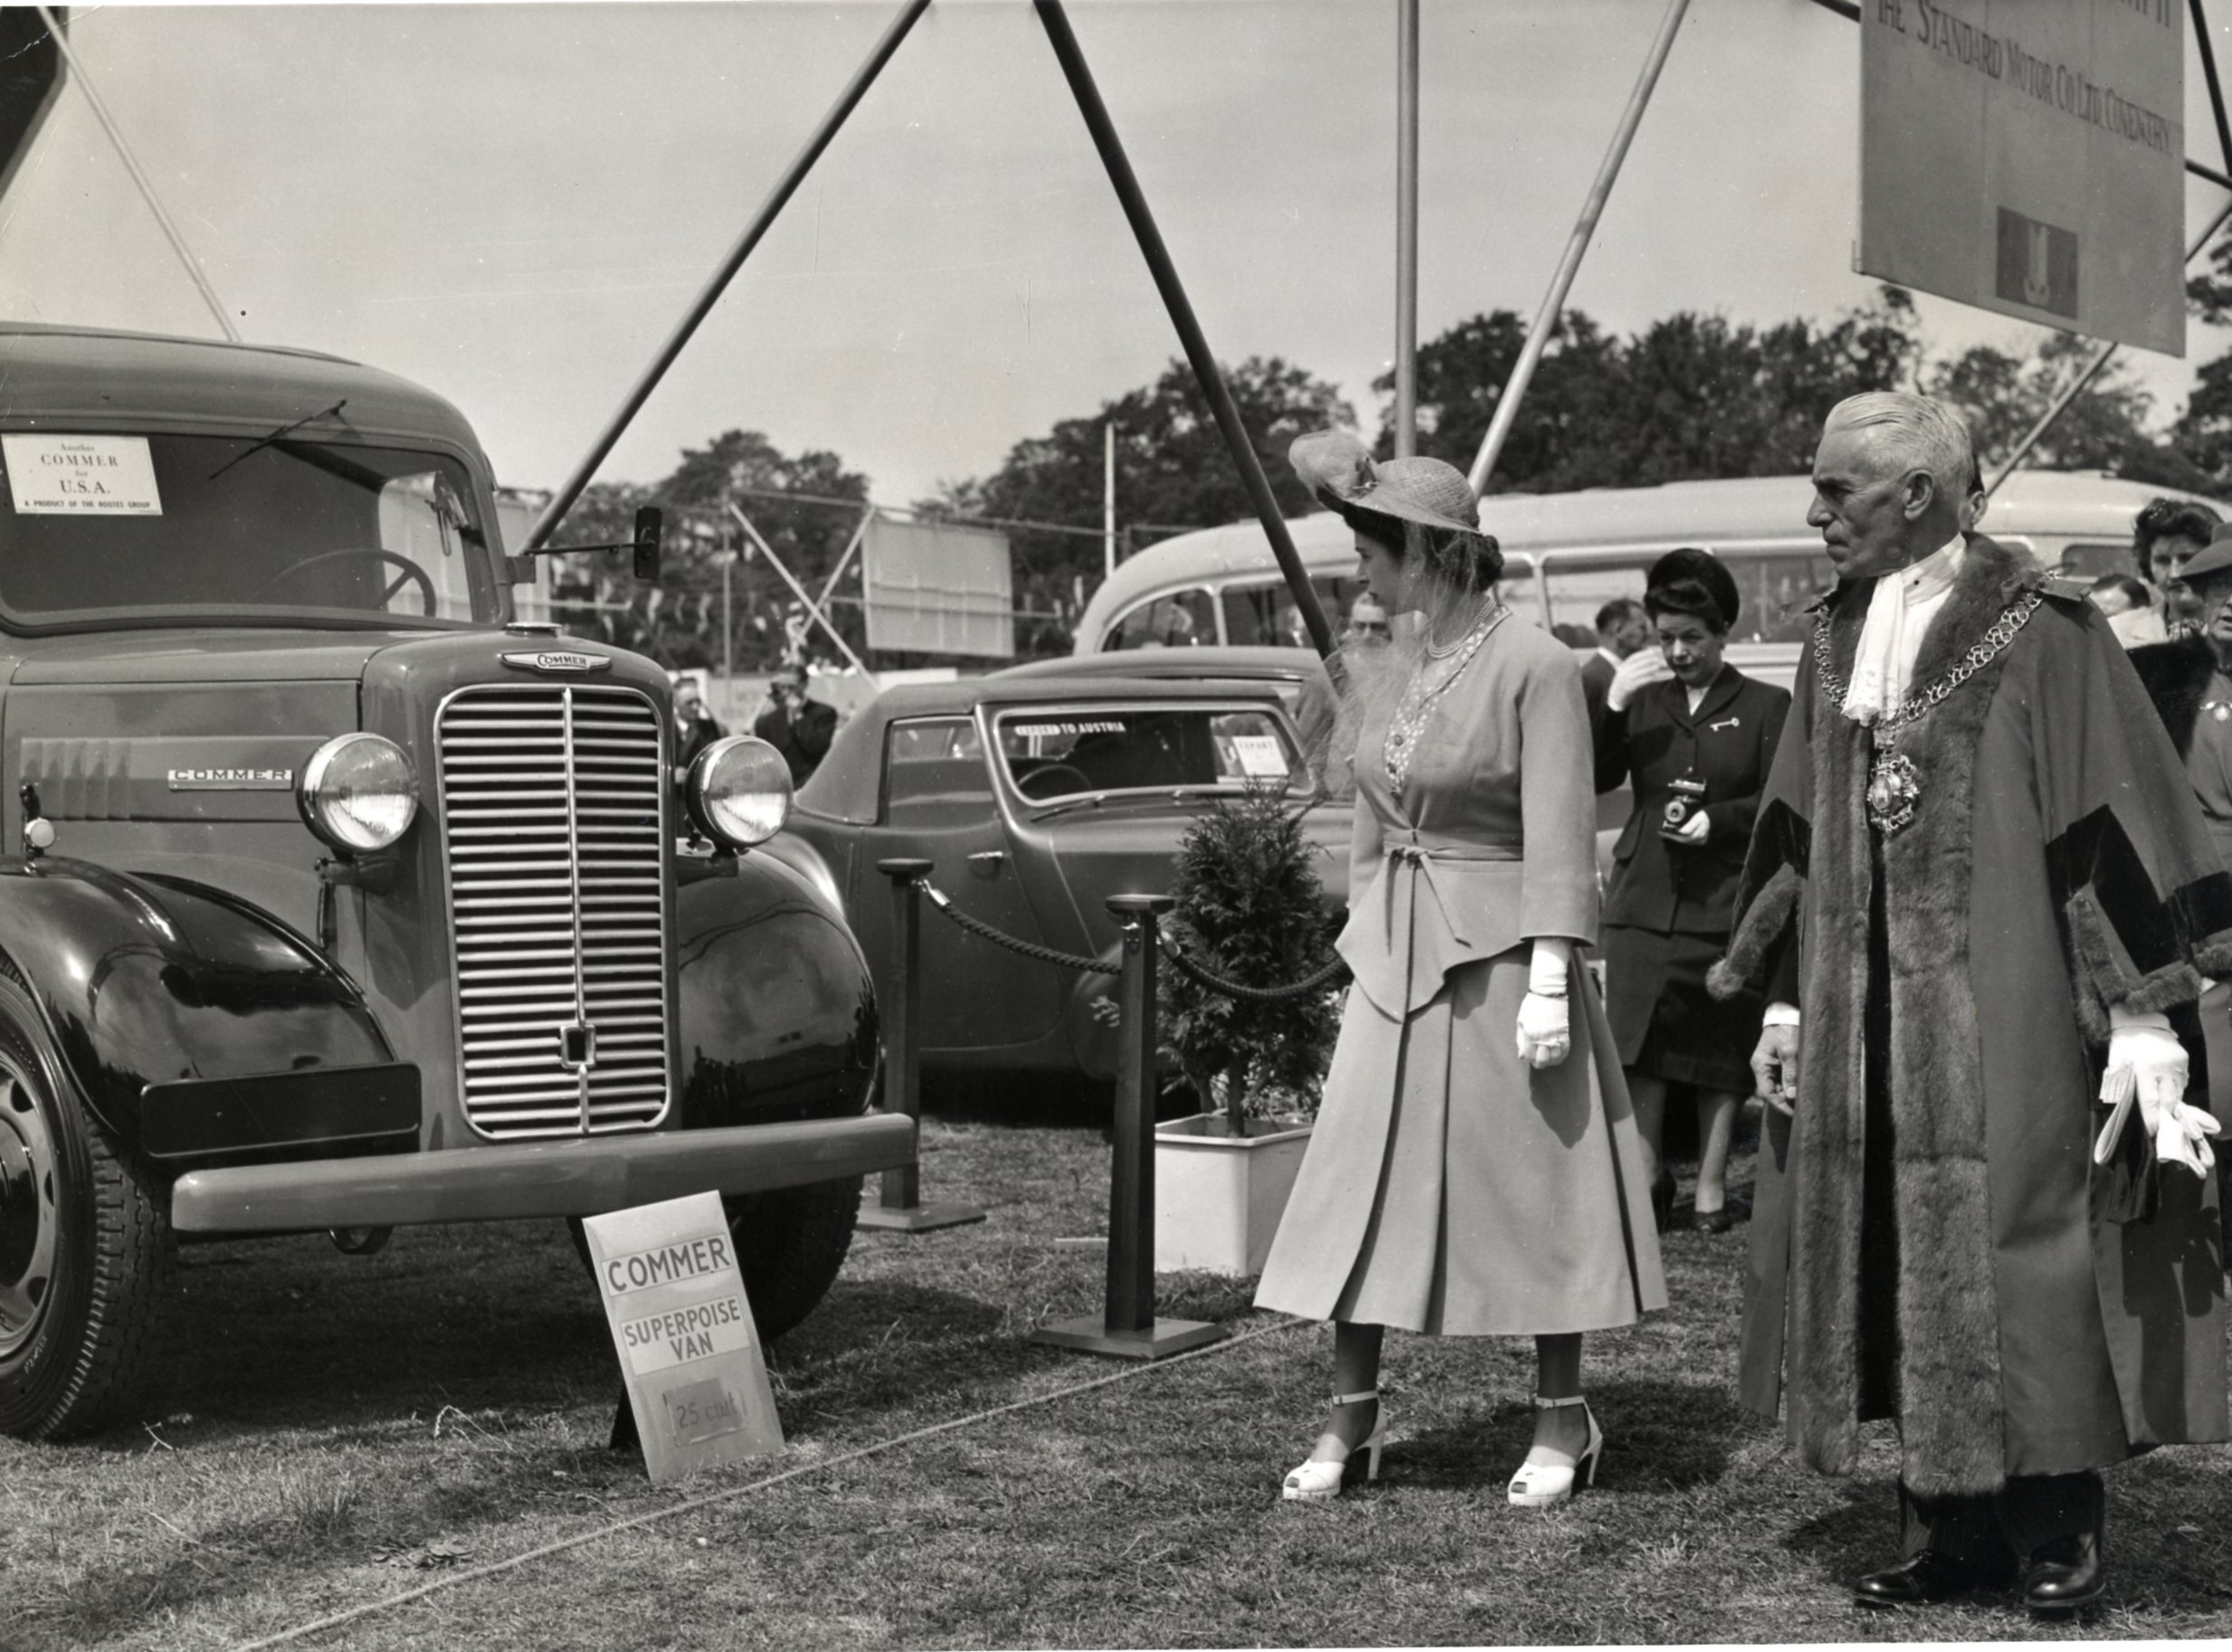 A black and white photograph of Princess Elizabeth looking at a Commer Superpoise van, part of the Rootes Group display in Coventry's War Memorial Park in 1948